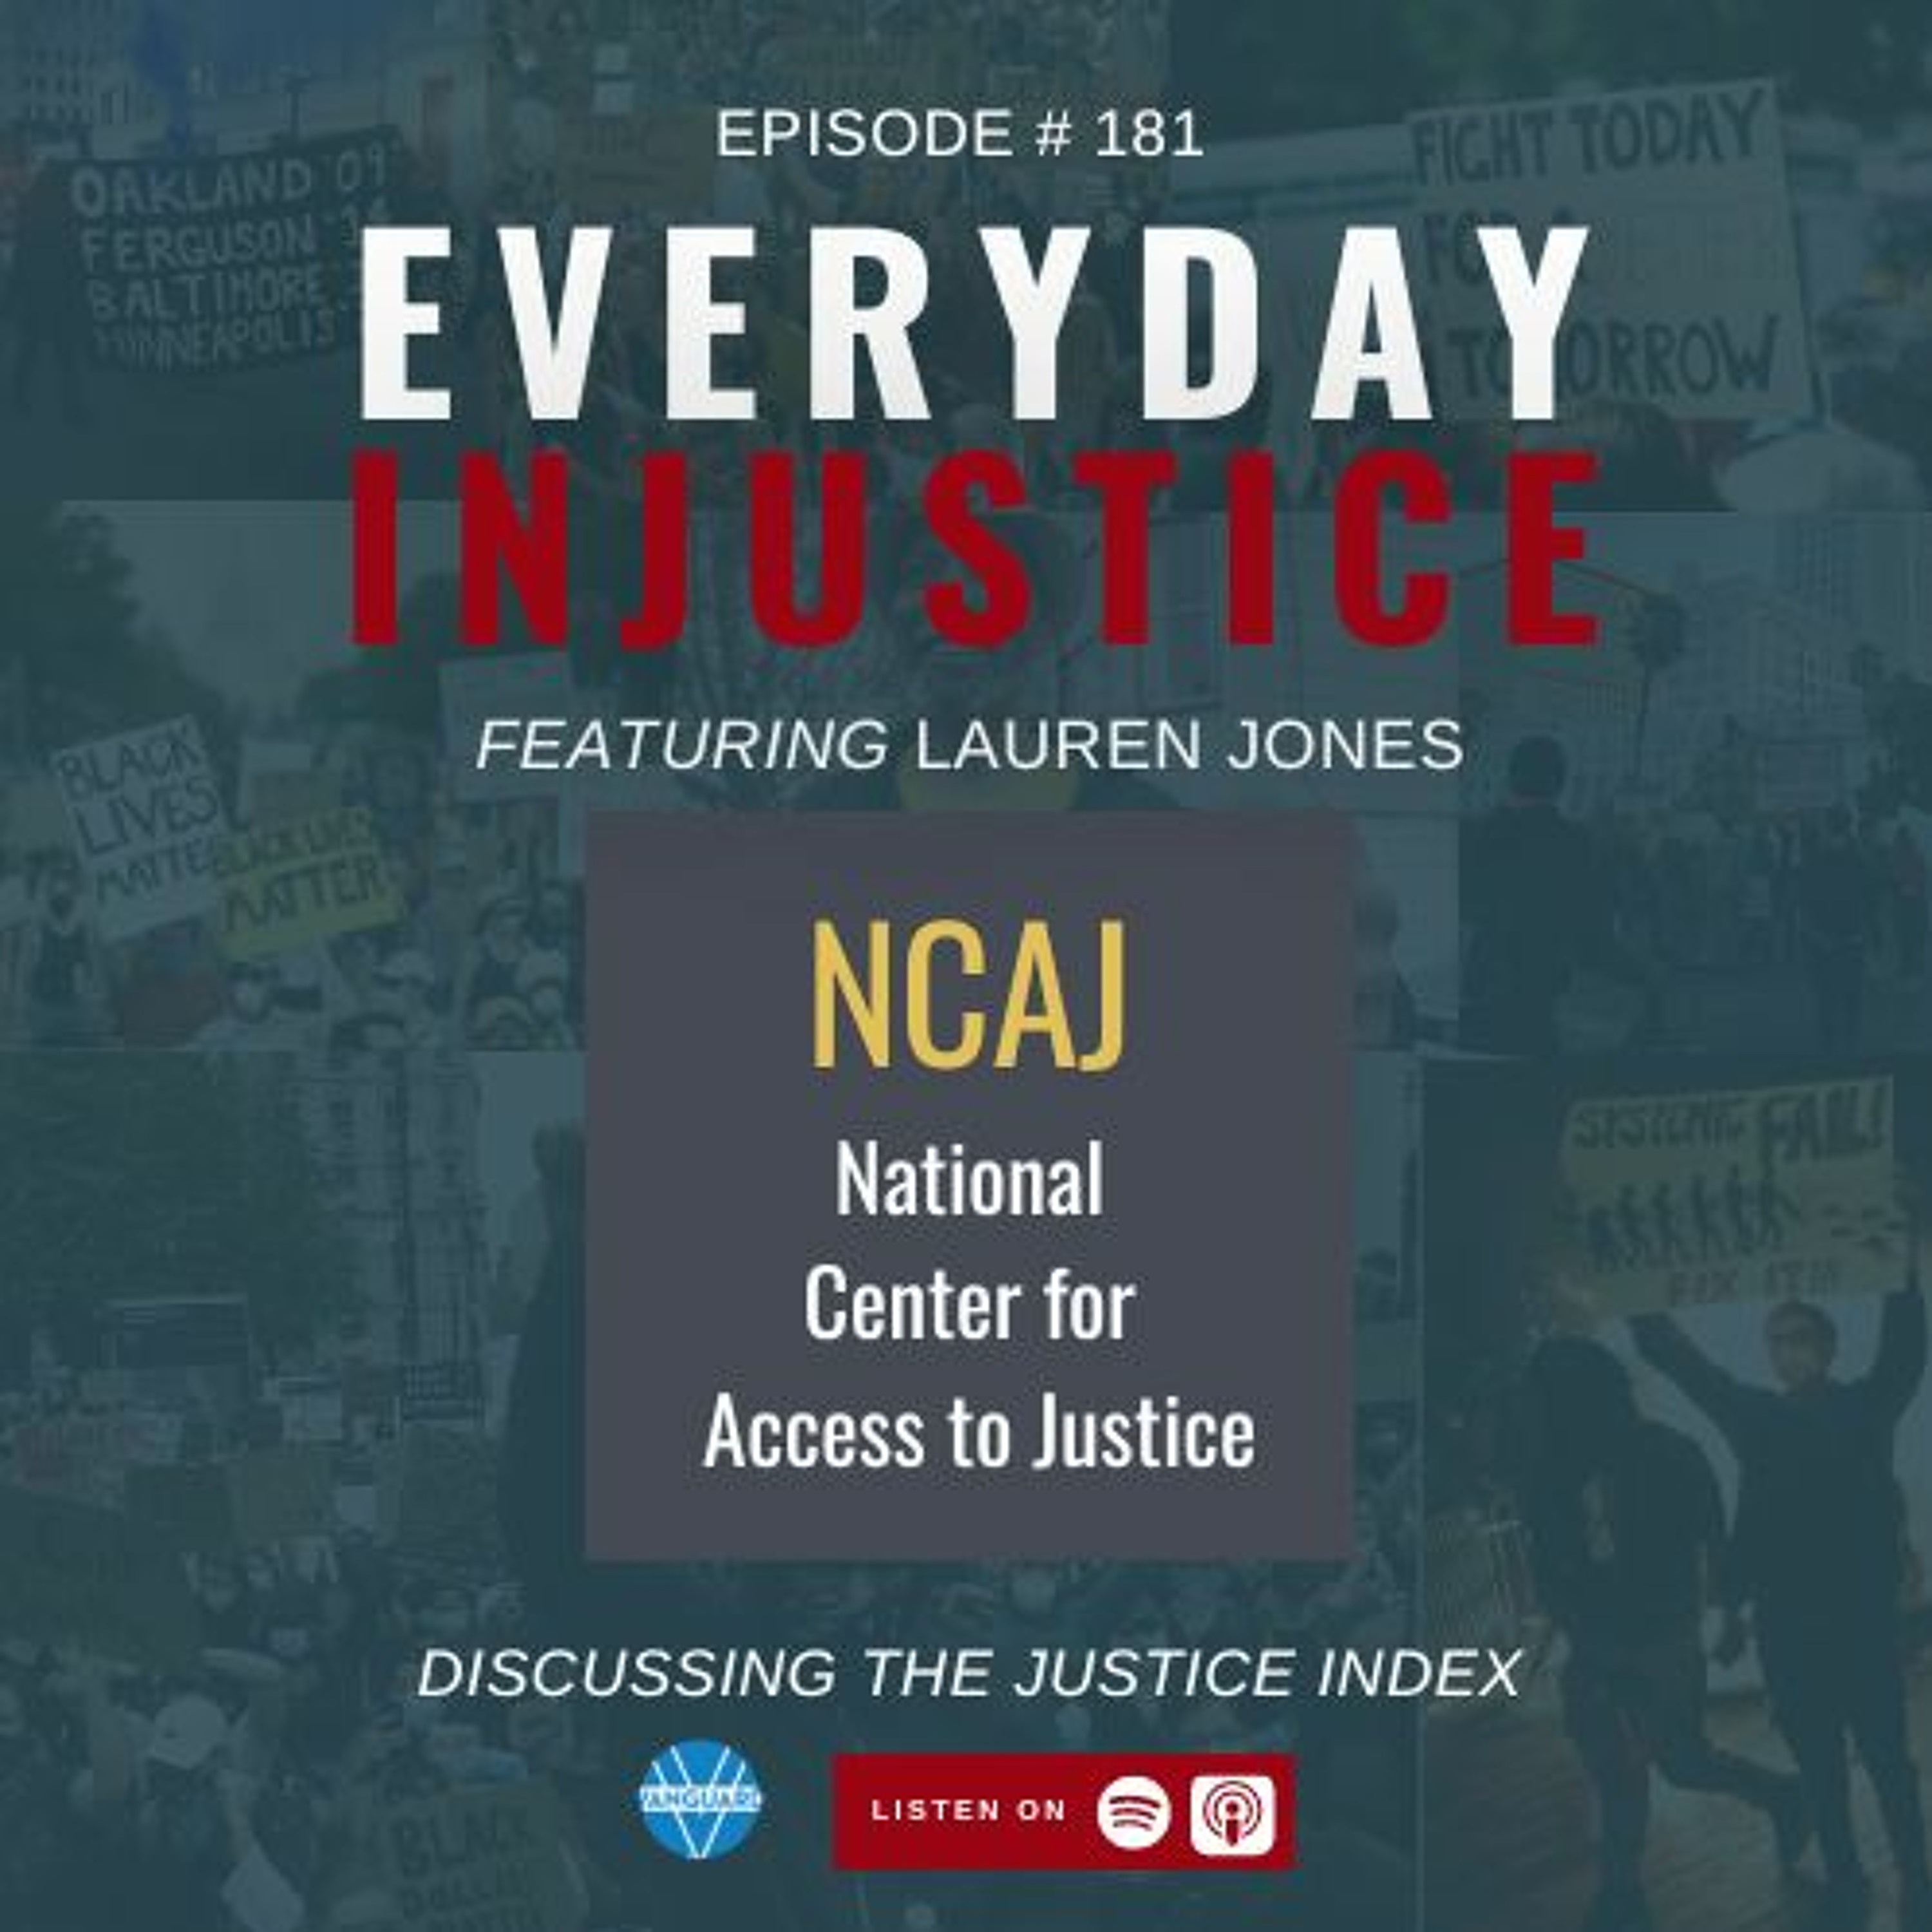 Everyday Injustice Podcast Episode 181: NCAJ on Failures of the Criminal Legal System